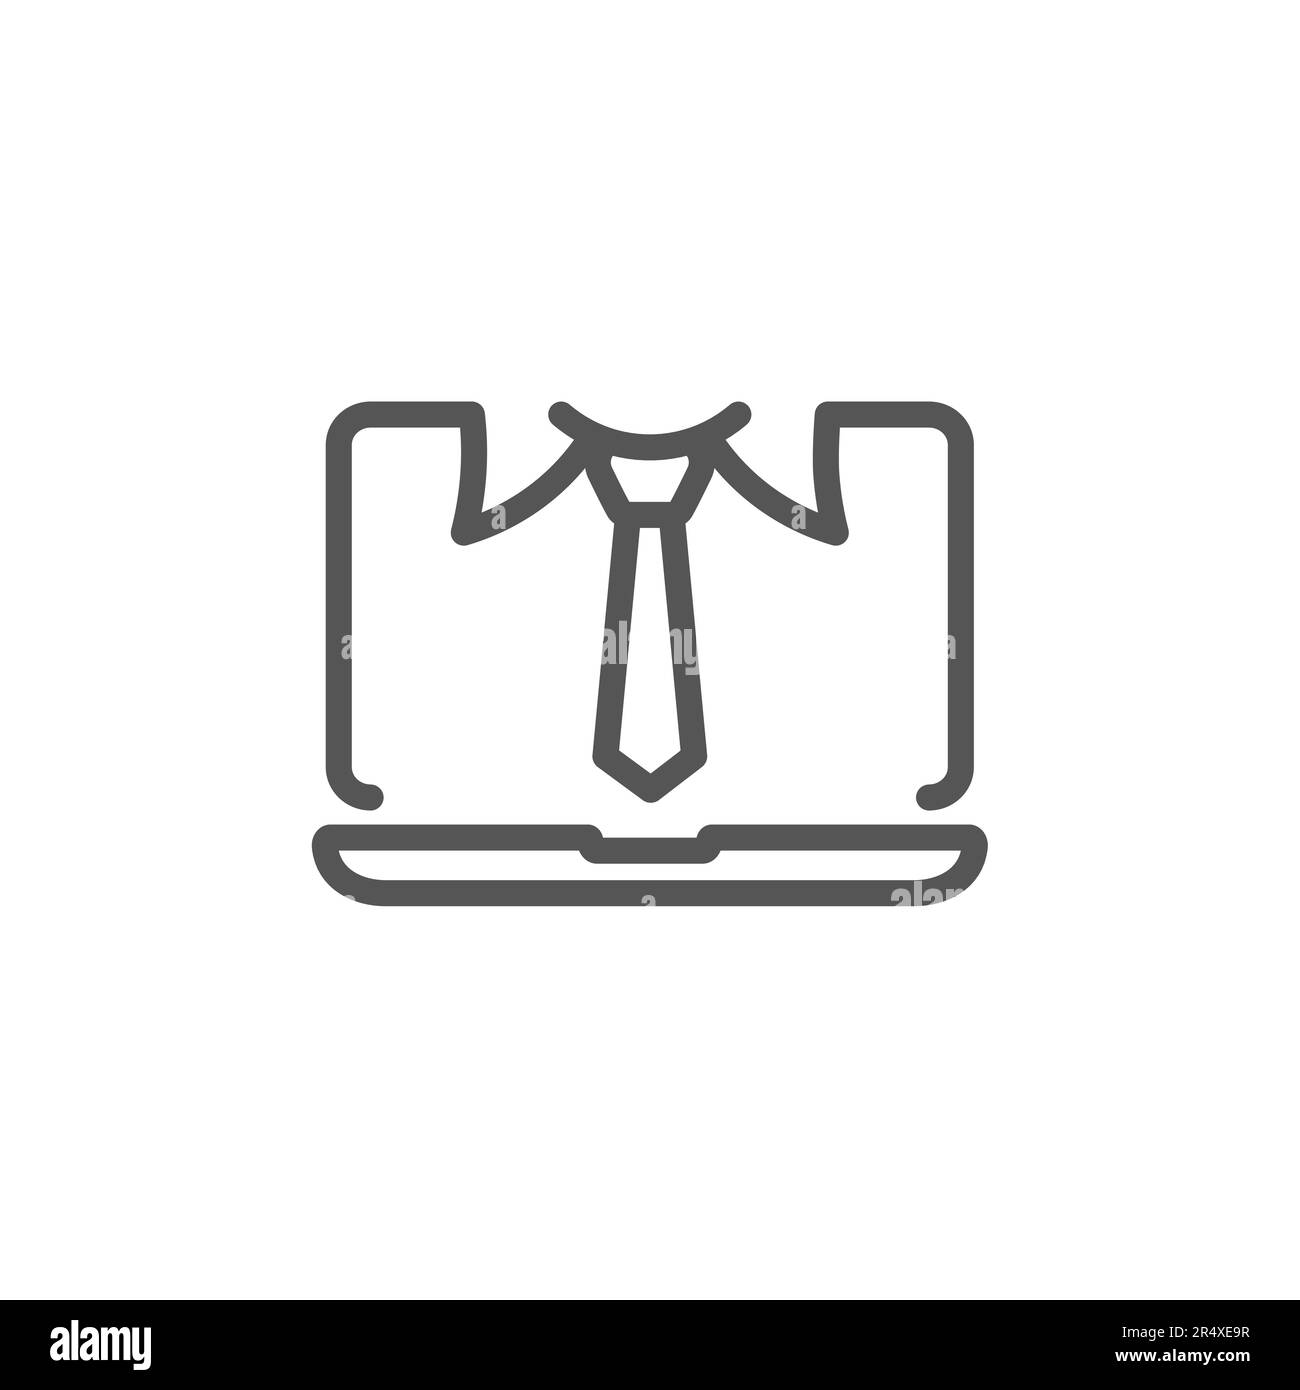 Online meeting. Businessman and laptop flat icon on white background Stock Vector